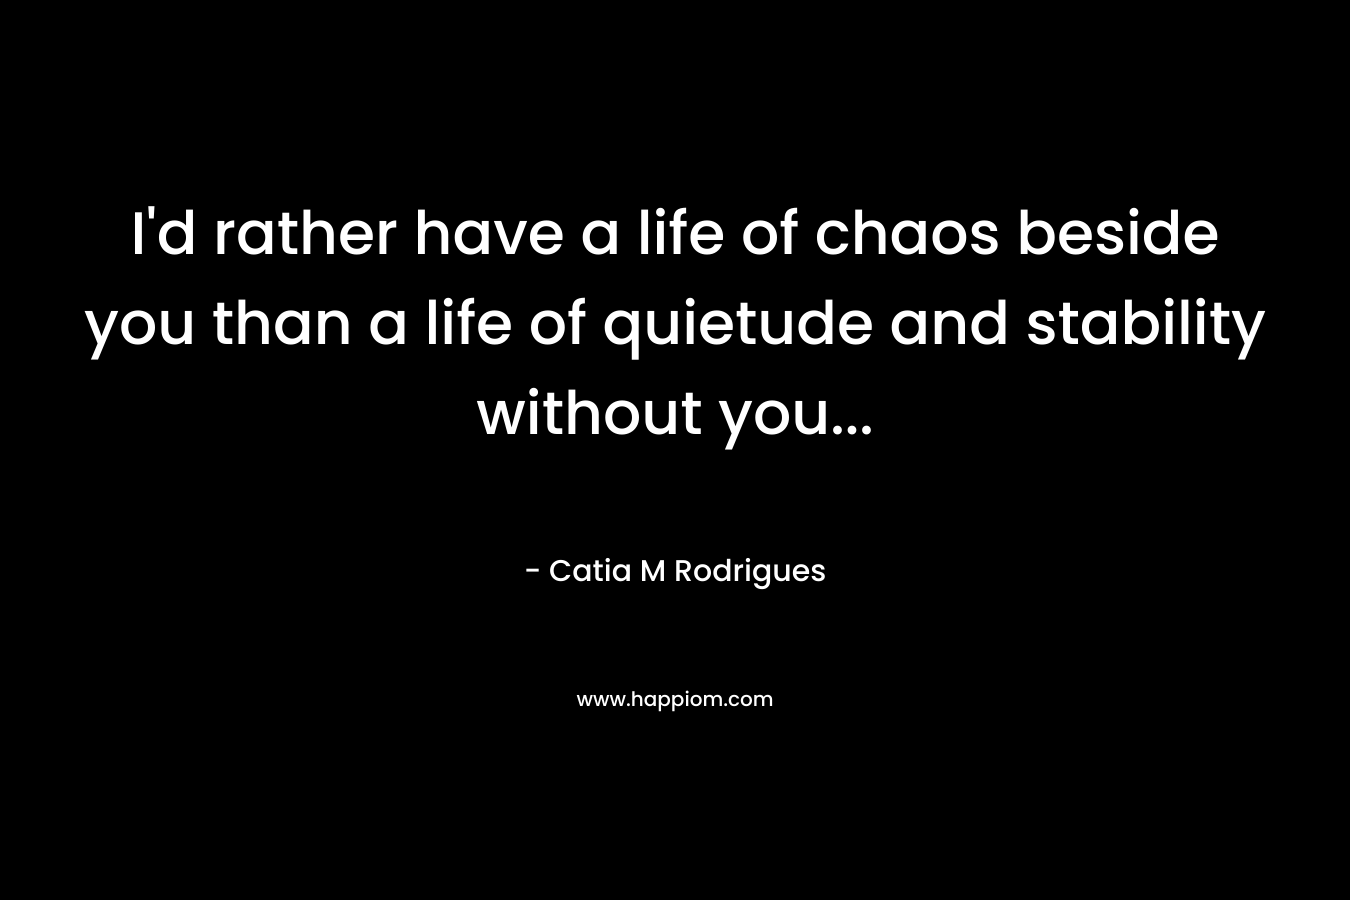 I’d rather have a life of chaos beside you than a life of quietude and stability without you… – Catia M Rodrigues